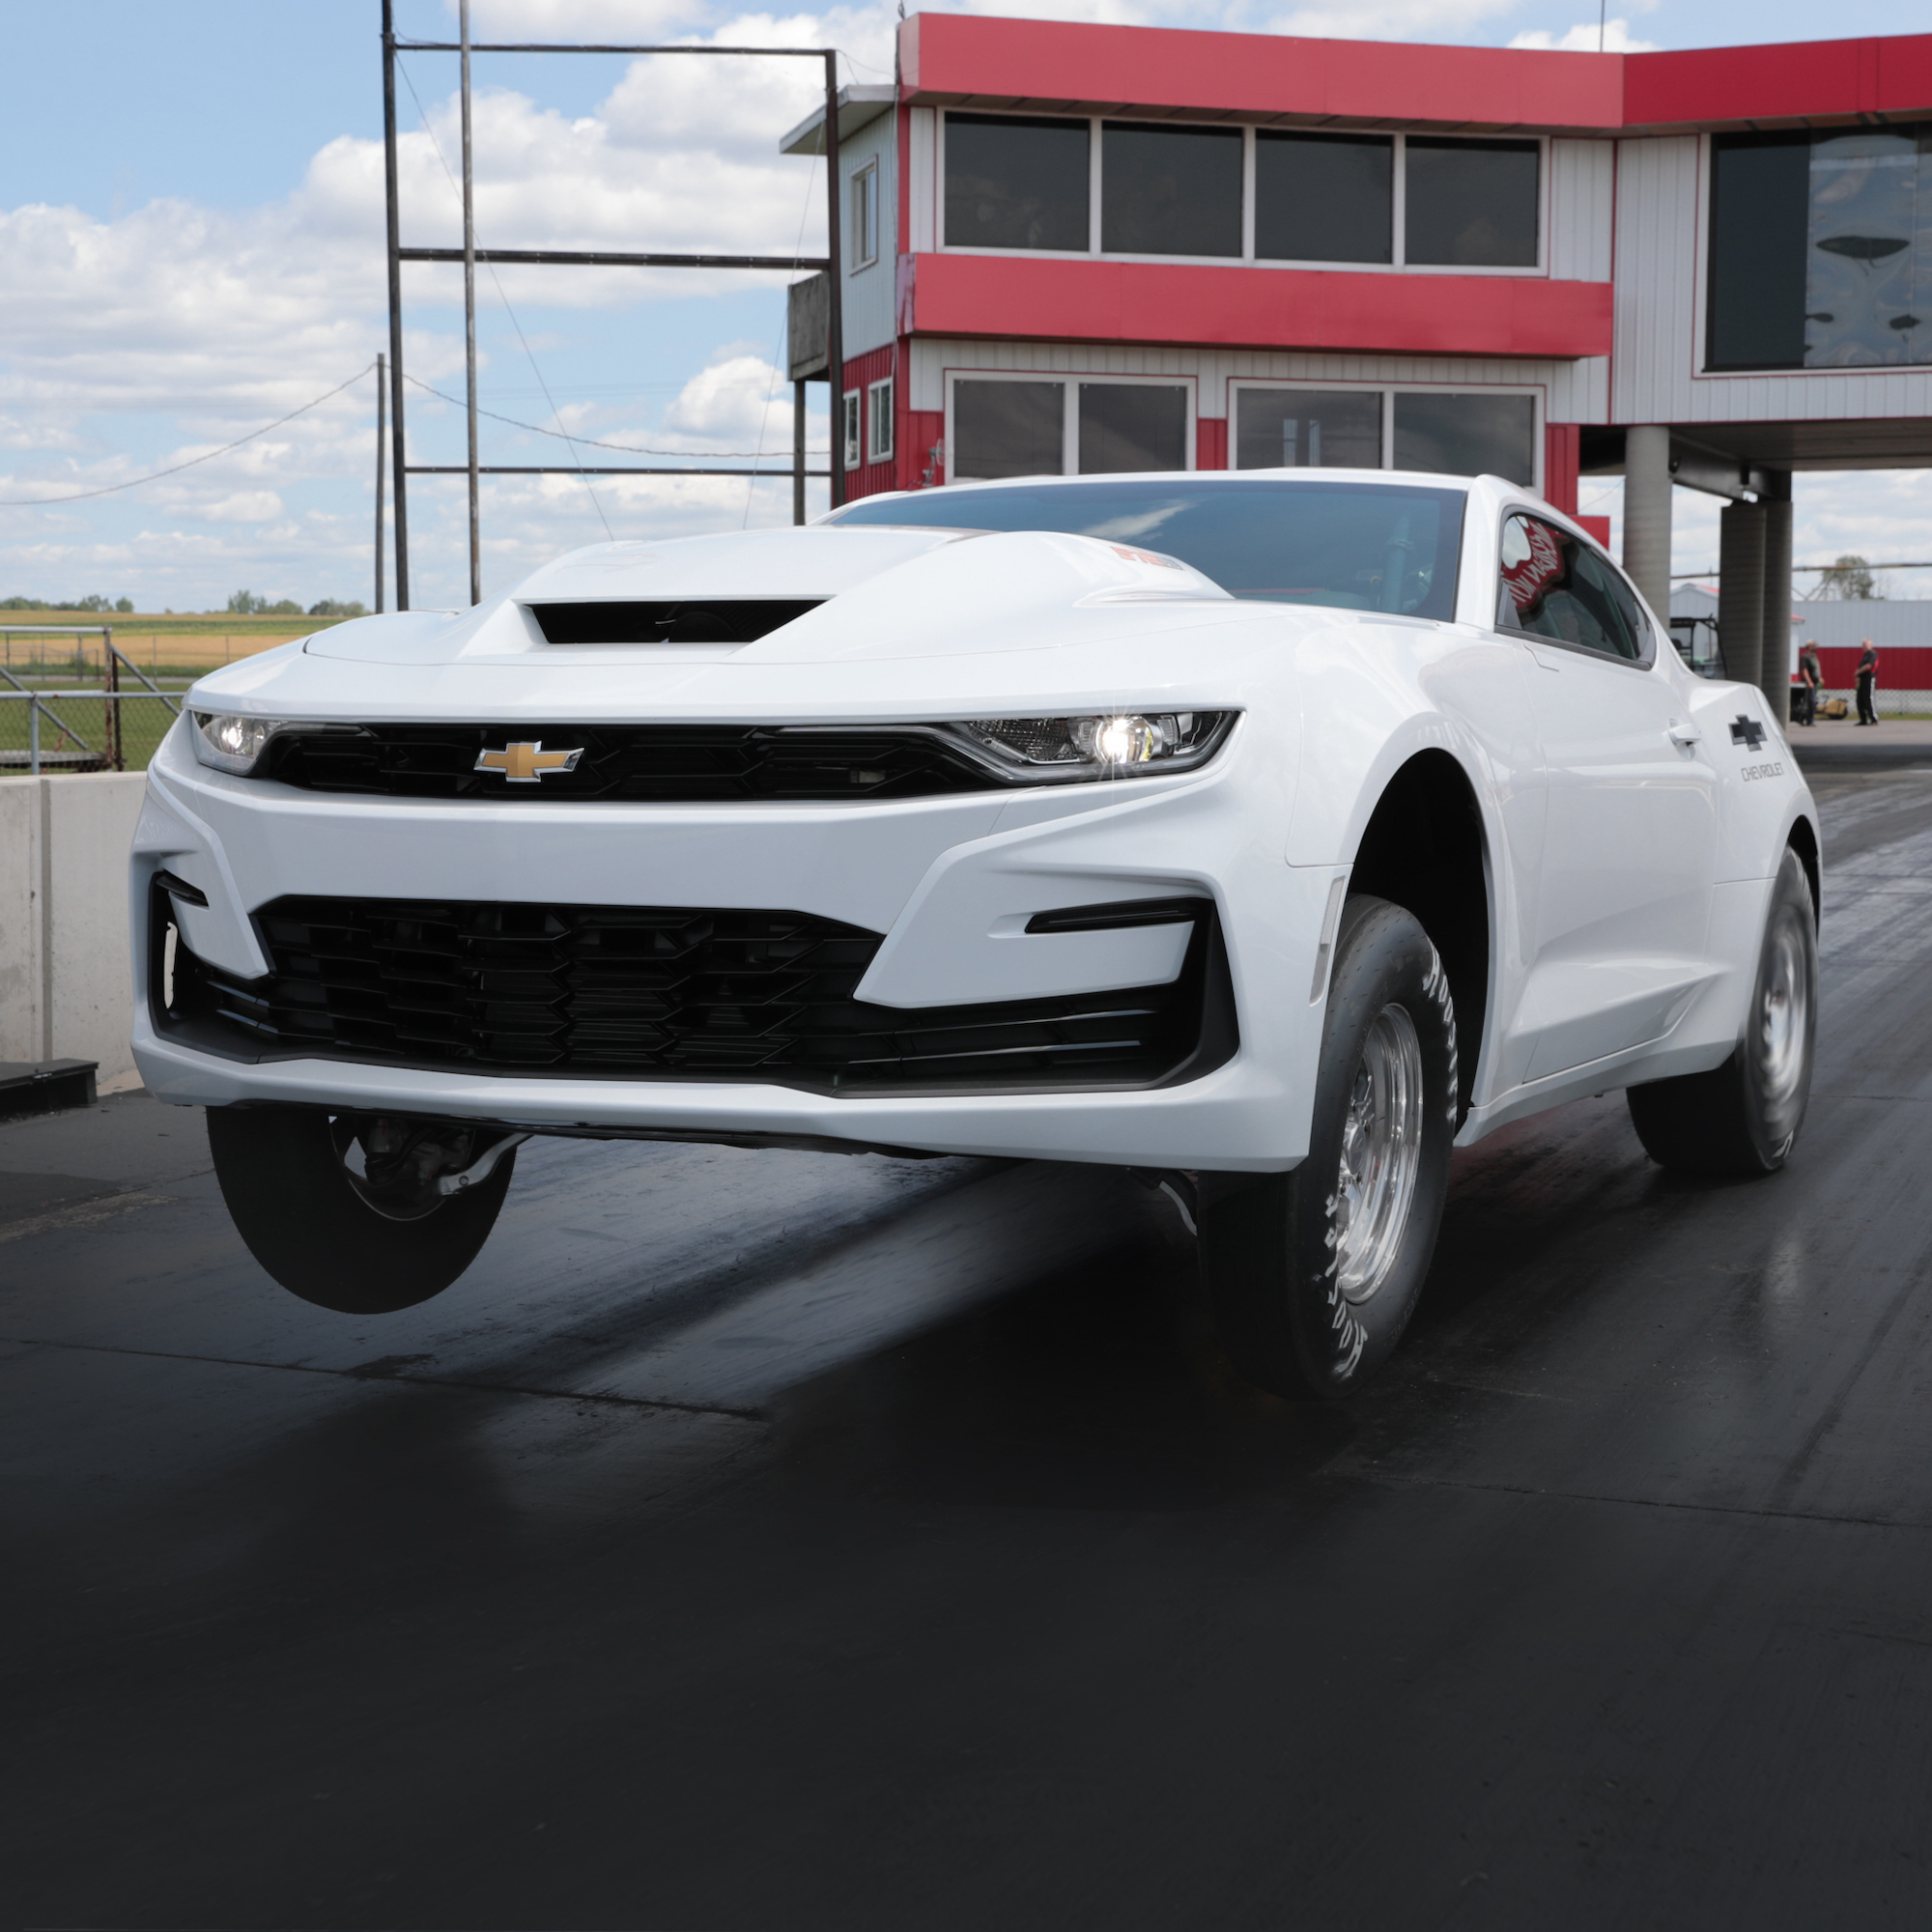 This Camaro has an engine so huge you can only drive it on the track